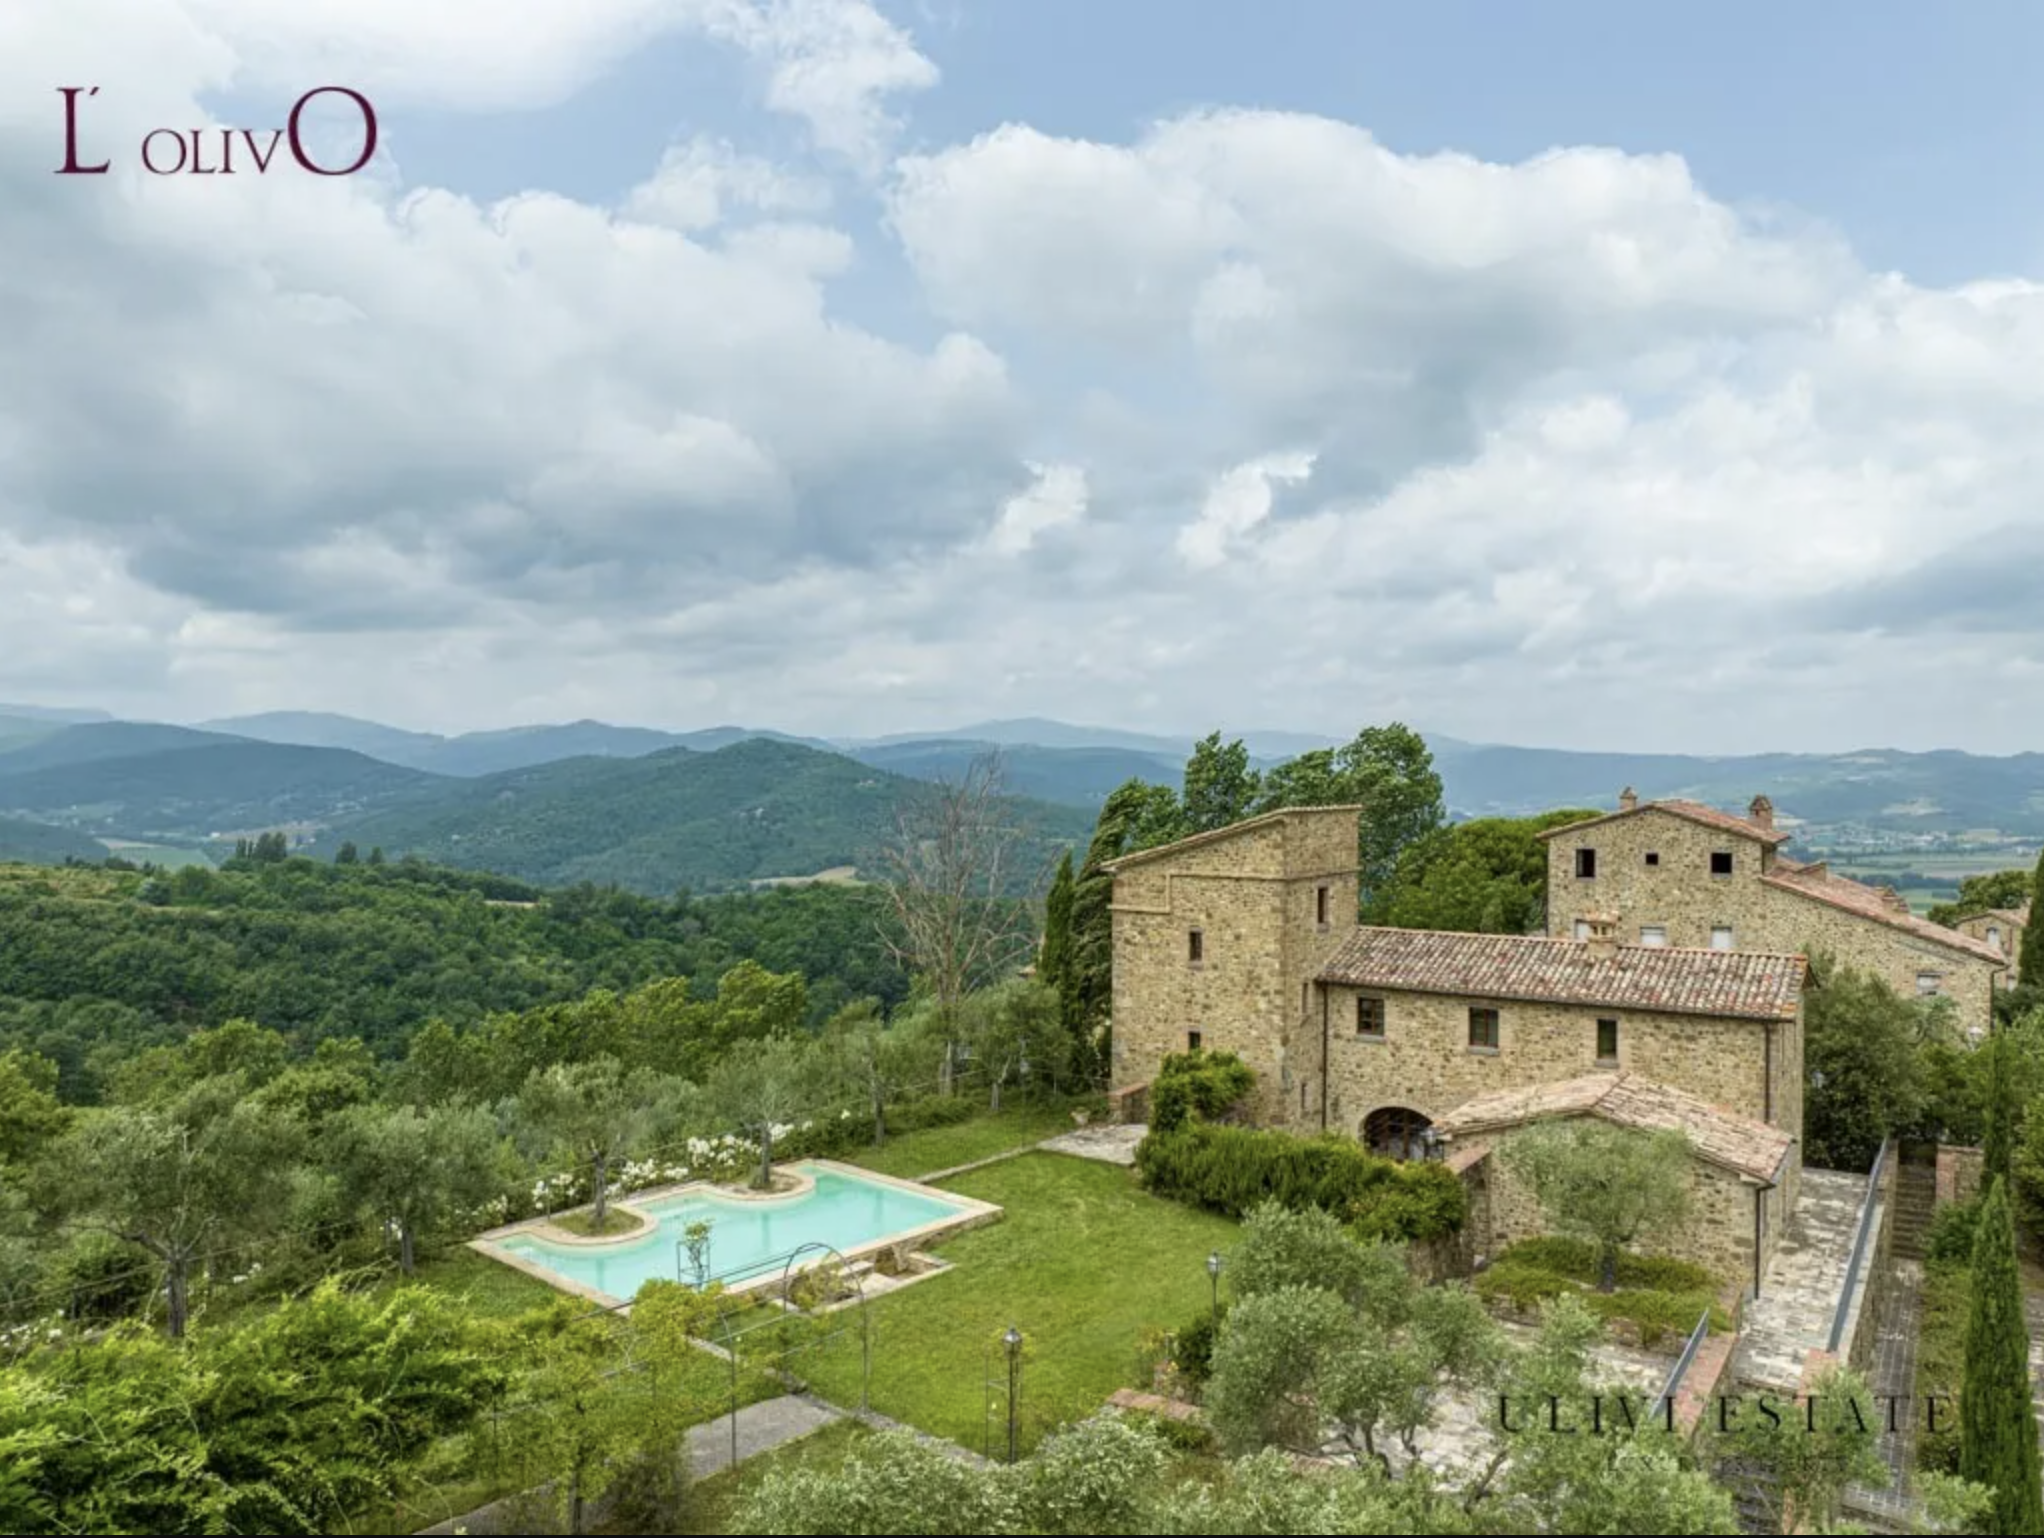 Francis York Borgo Pieve di Comunaglia in Umbria, Italy With 17 Country Houses, 1000-Year-Old Church, Vineyards 00036.png